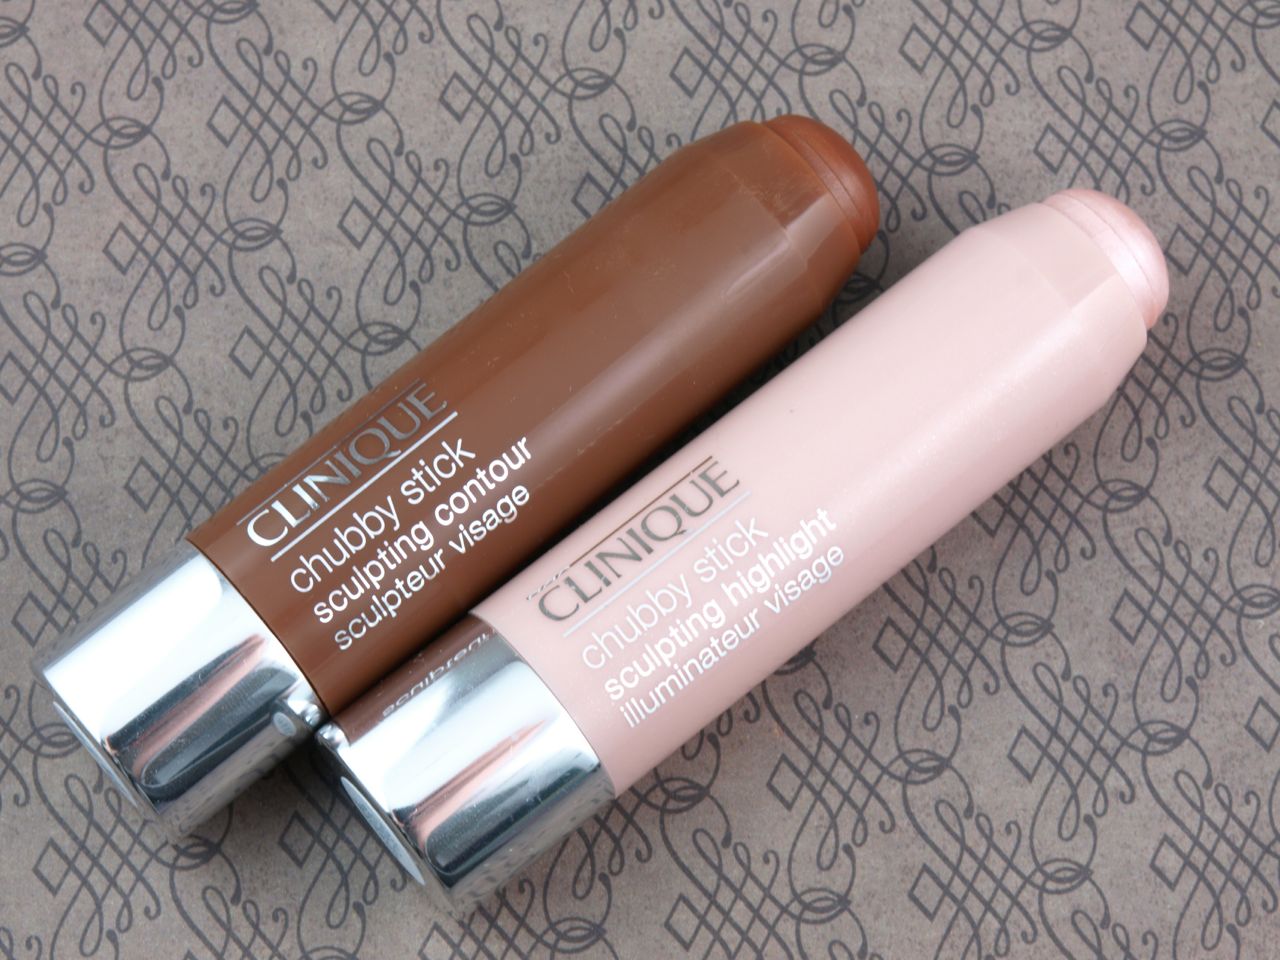 Clinique Chubby Stick Sculpting Contour & Sculpting Highlight: Review and Swatches